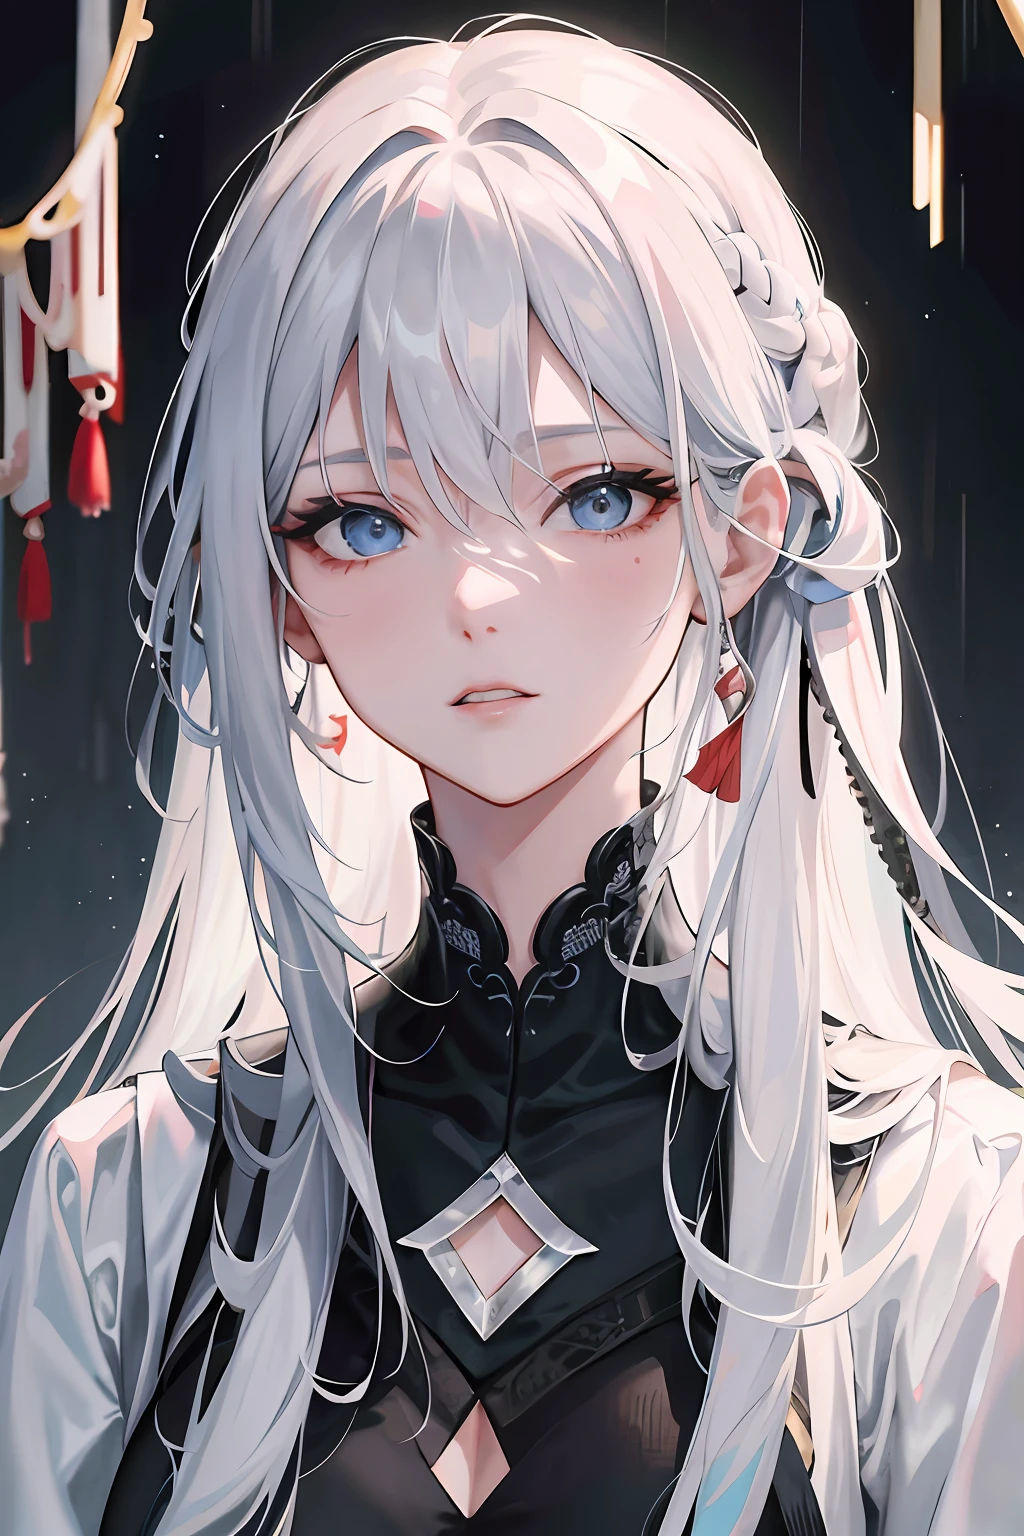 Anime girl with long white hair and blue eyes in a black dress, Girl with white hair, a beautiful anime portrait, style of anime4 K, white haired Cangcang, Stunning anime face portrait, white-haired god, Perfect white haired girl, detailed portrait of an anime girl, portrait anime girl, White-haired, Anime art wallpaper 4k, Anime art wallpaper 4 K